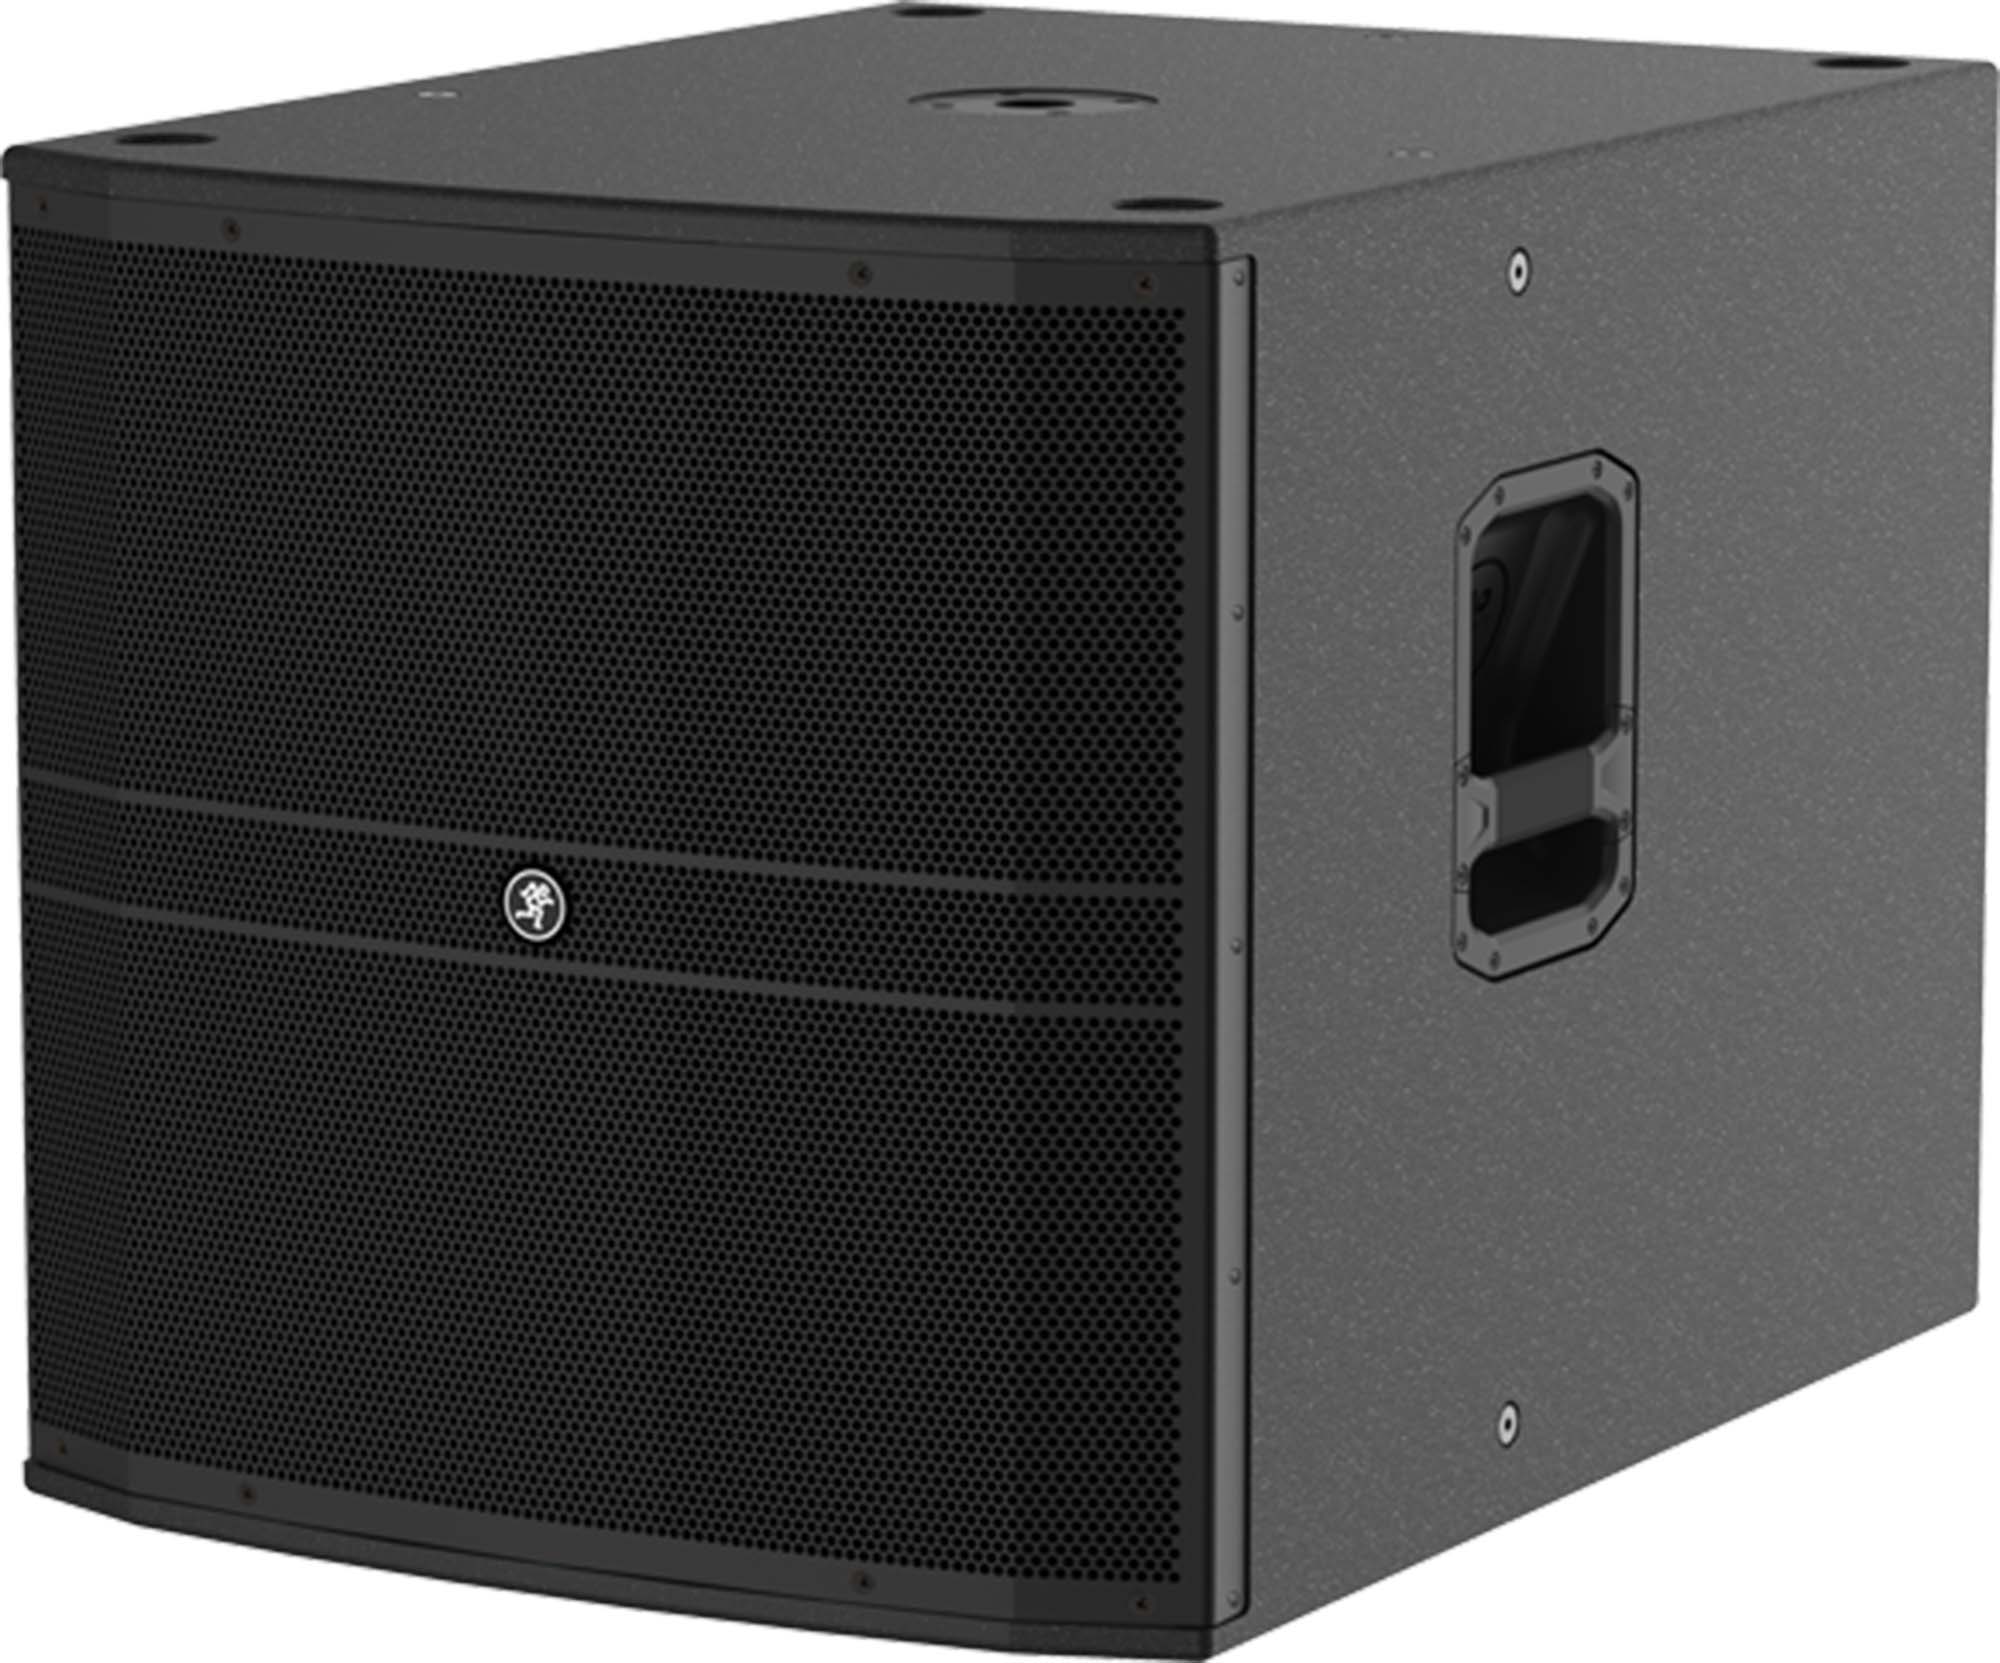 B-Stock: Mackie DRM18S 2000W 18" Professional Powered Subwoofer by Mackie